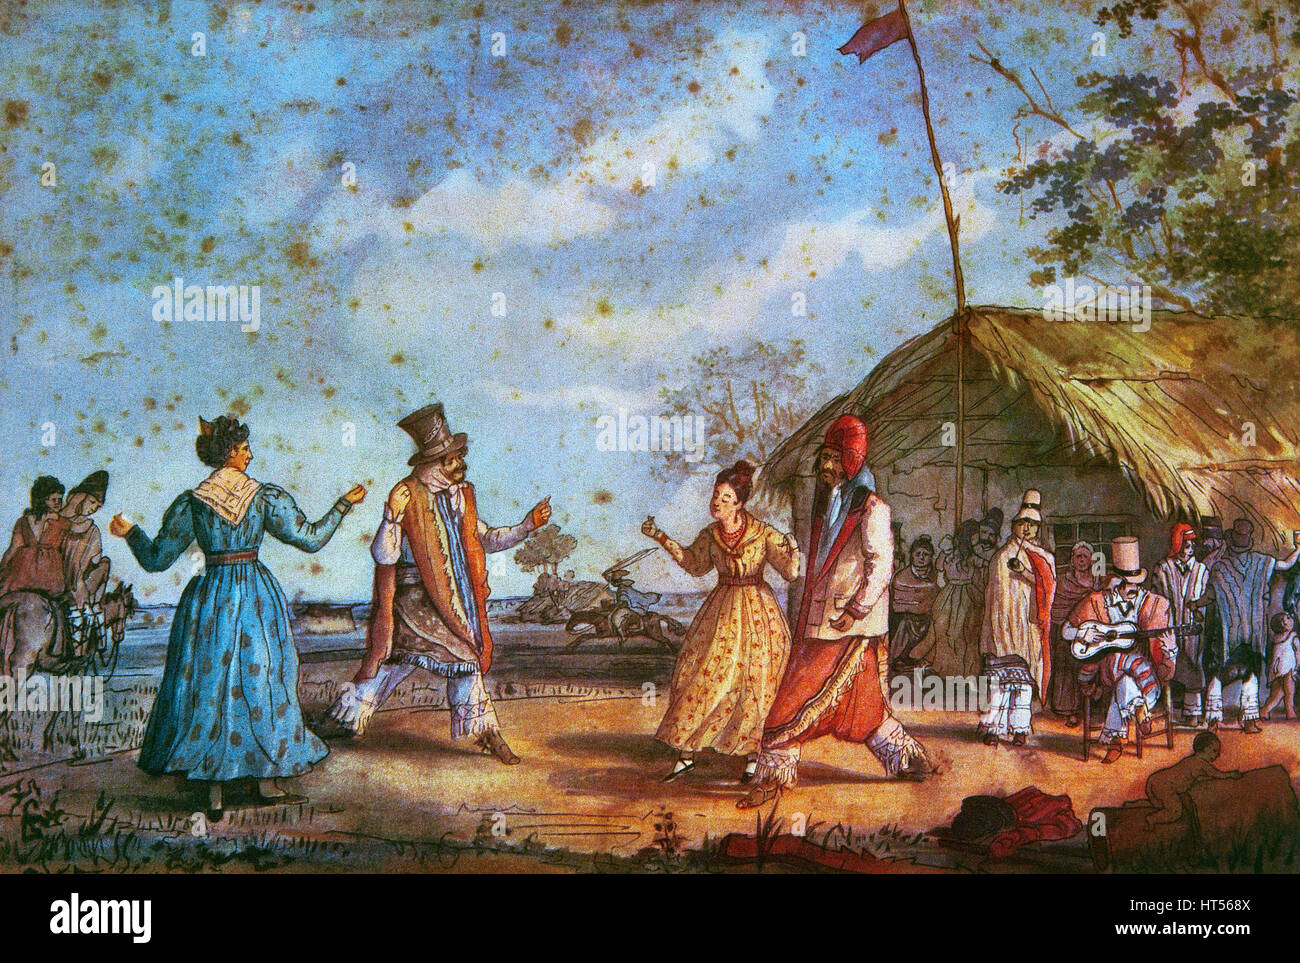 Folklore. Argentina. Buenos Aires. 19th century. Traditional dance 'Cielito'. Lithograph of a watercolor by Carlos Enrique Pellegrini, 1831. National Historical Museum. Buenos Aires. Argentina. Stock Photo